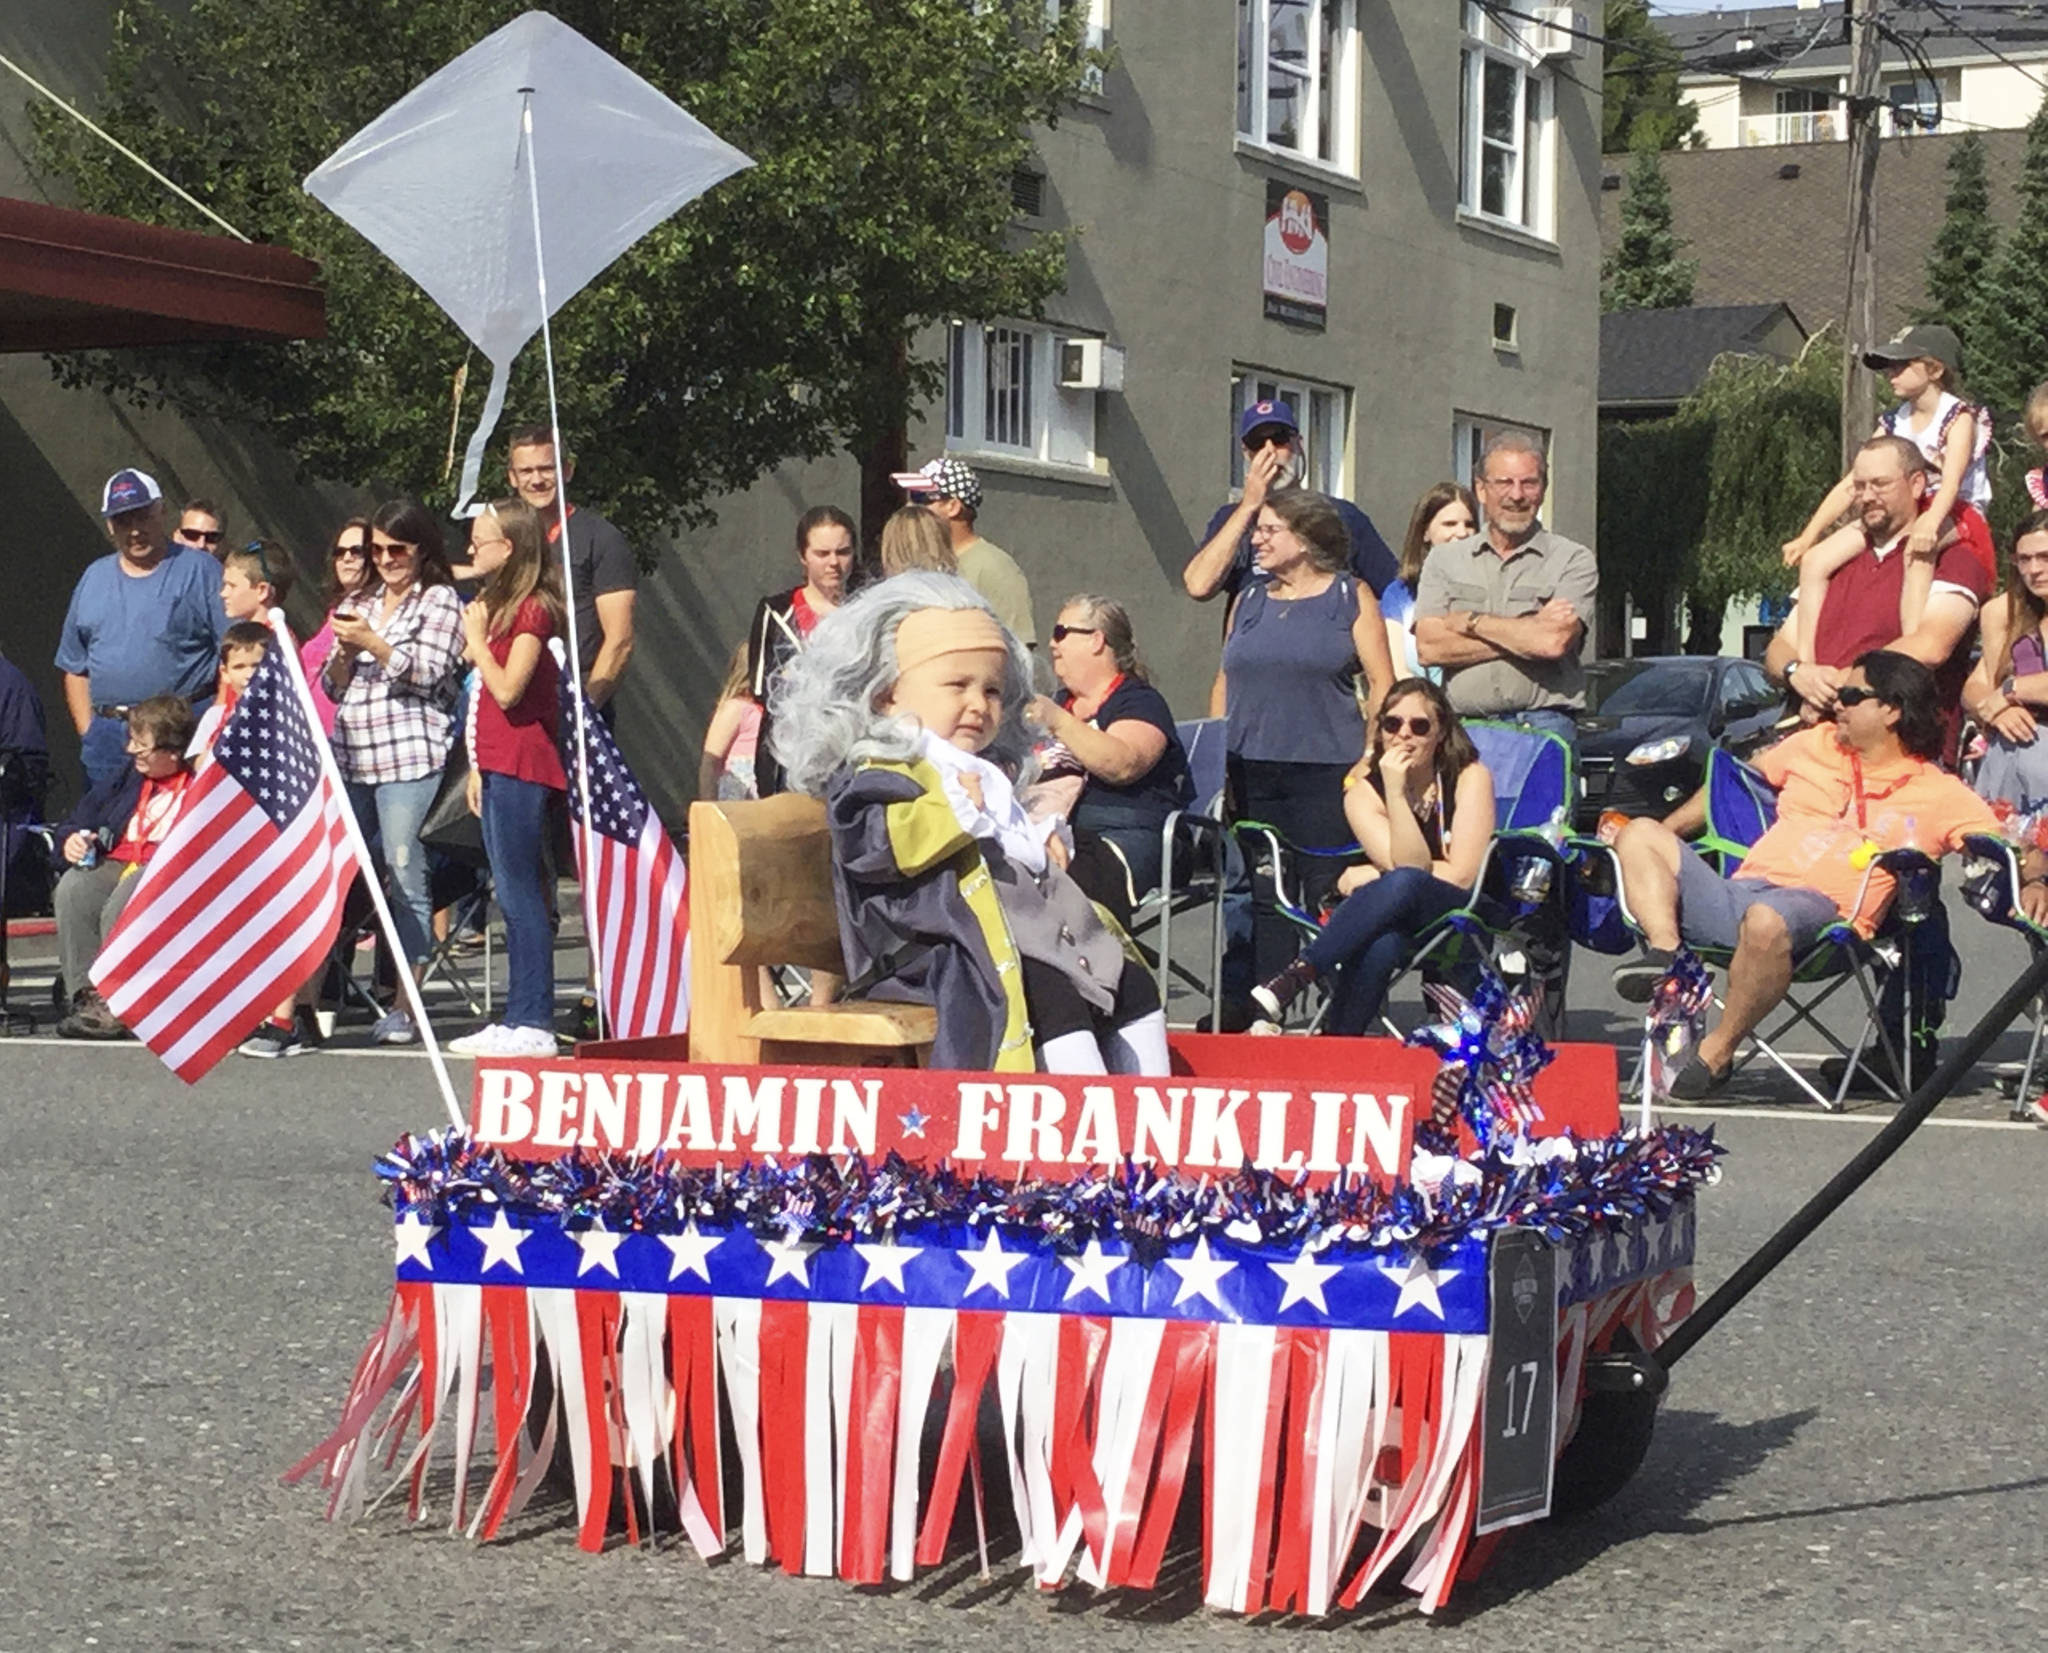 Dressed as a young Benjamin Franklin riding in a patriotic-decorated wagon, 10-month-old Ledger Greenfield of Lake Stevens took first place float honors in Arlington’s Fourth of July Parade. His father, Bob, pulled the wagon down Olympic Avenue donning a one hundred dollar bill costume.